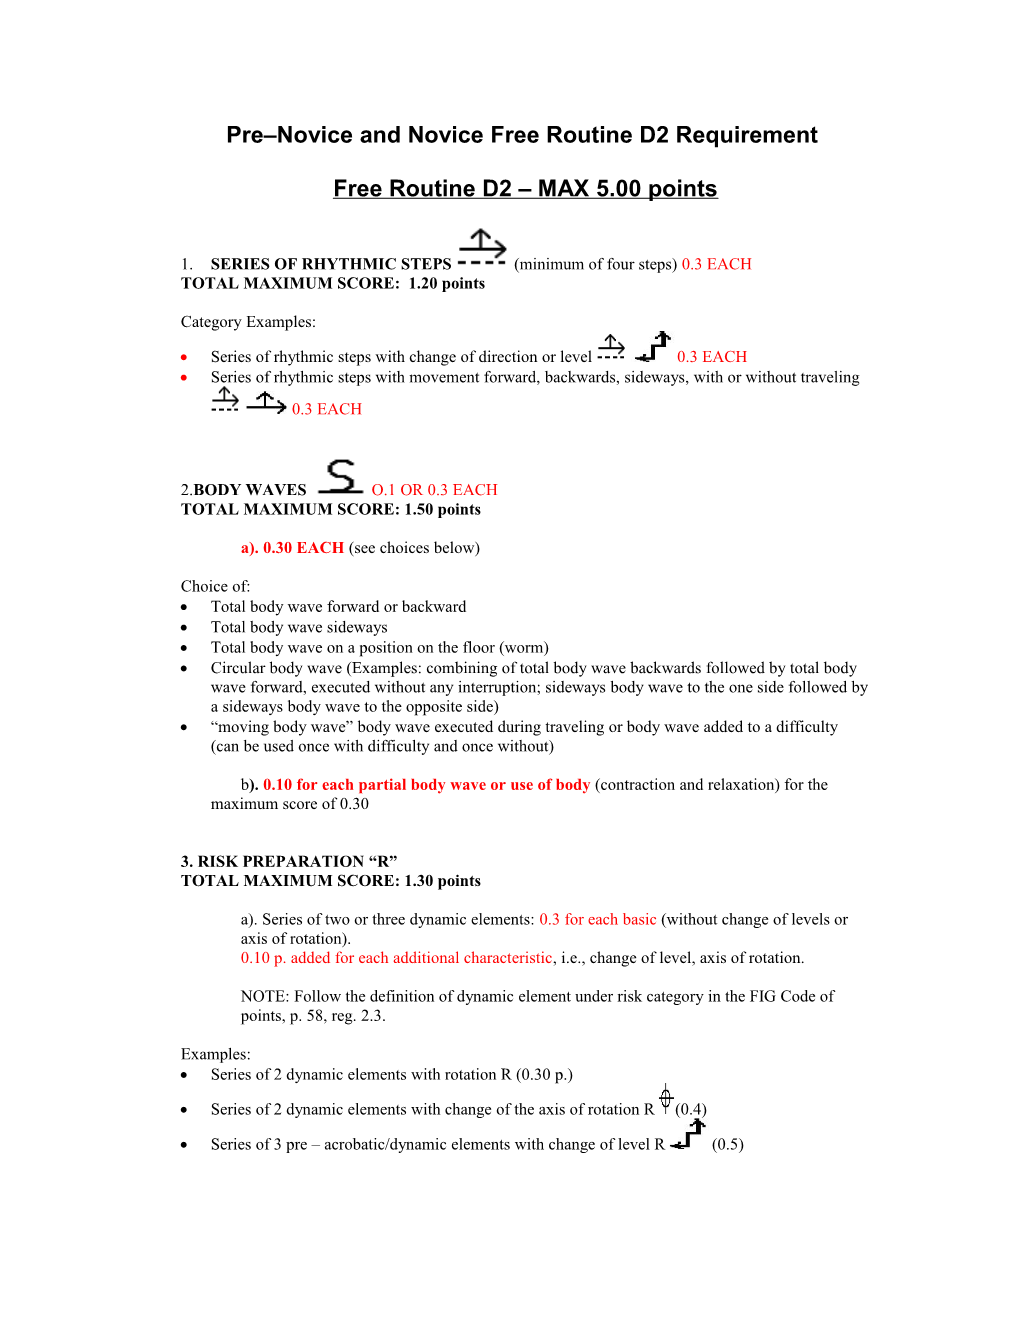 Pre Novice and Novice Free Routine D2 Requirement